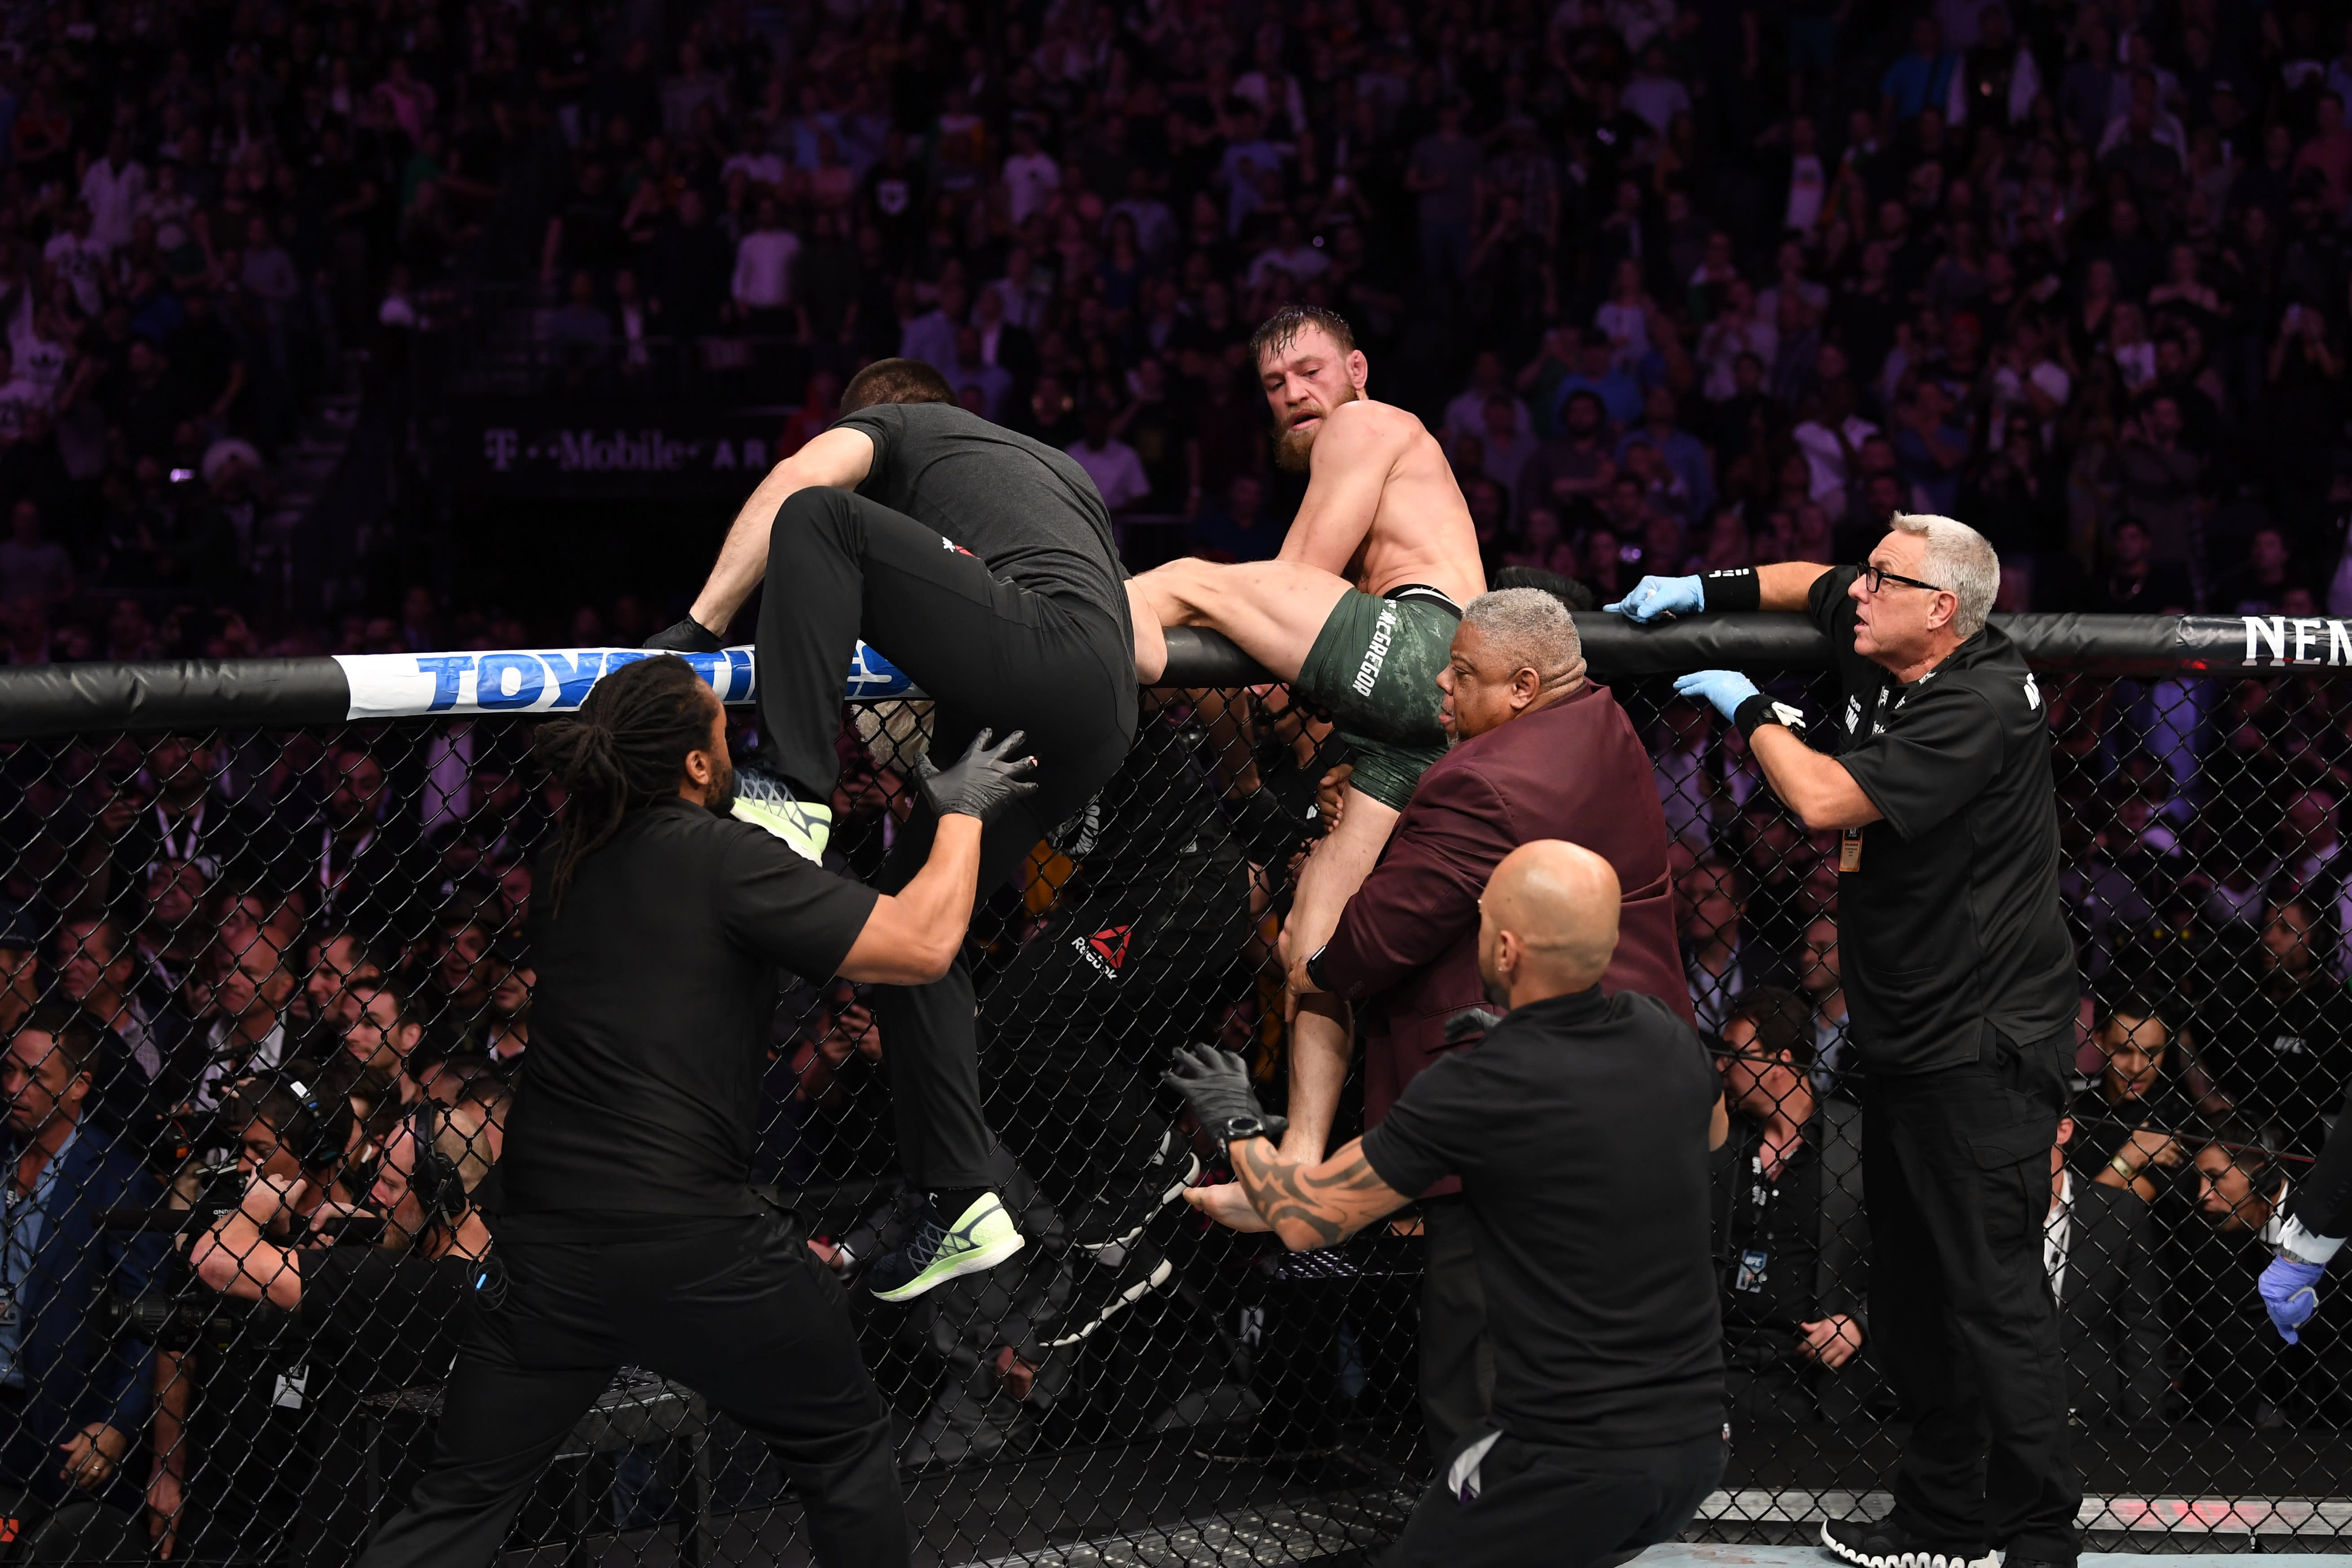 Conor, Khabib and the Method in the UFC's Madness - WSJ